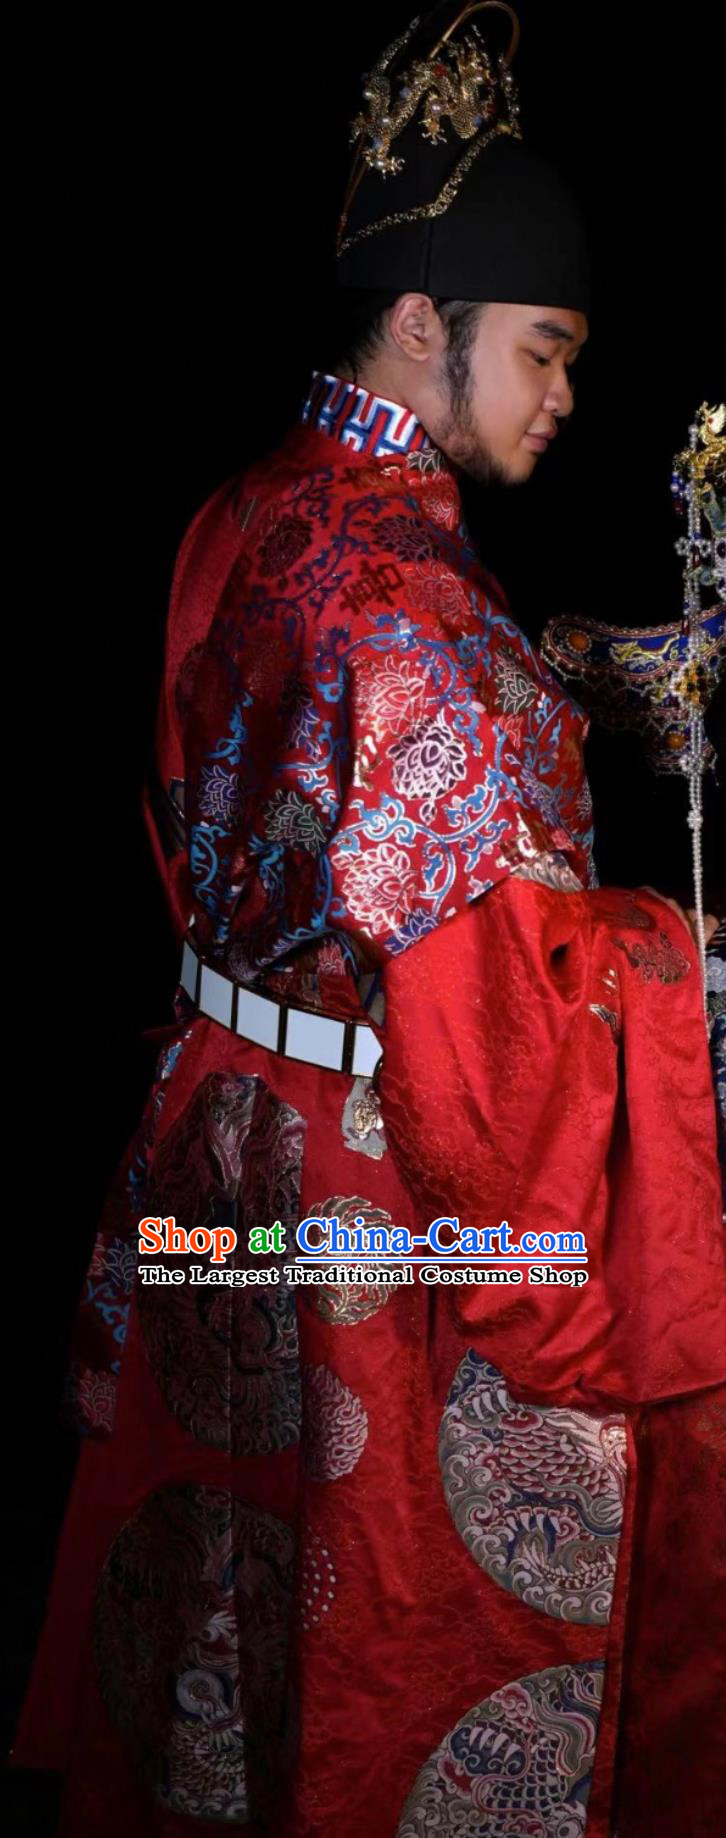 Ancient Chinese Emperor Costume Hanfu Online Shop Traditional Ming Dynasty Red Brocade Imperial Robe